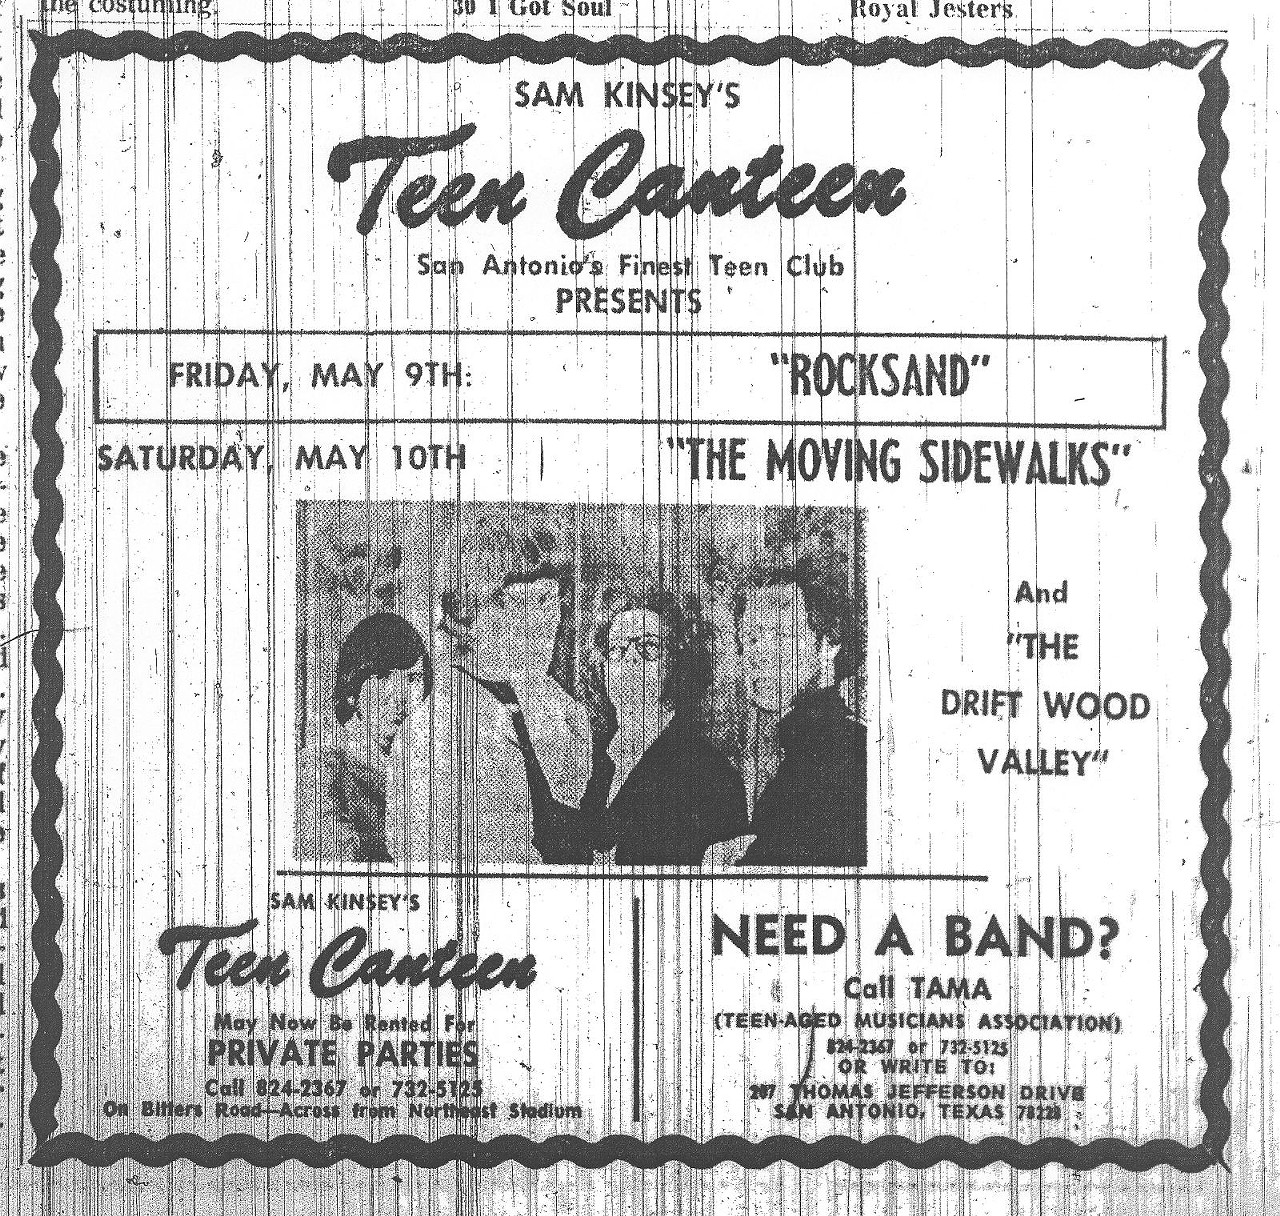 Teen Canteen
Long before Cowboys Dancehall became the spot for teens to hang out, Teen Canteen held that honor with multiple locations running between 1961 and 1977. The venue welcomed musicians like Billy Gibbons, who would later form ZZ Top, and Michael Nesmith before his Monkees fame.
Photo via WordPress / MySAPL